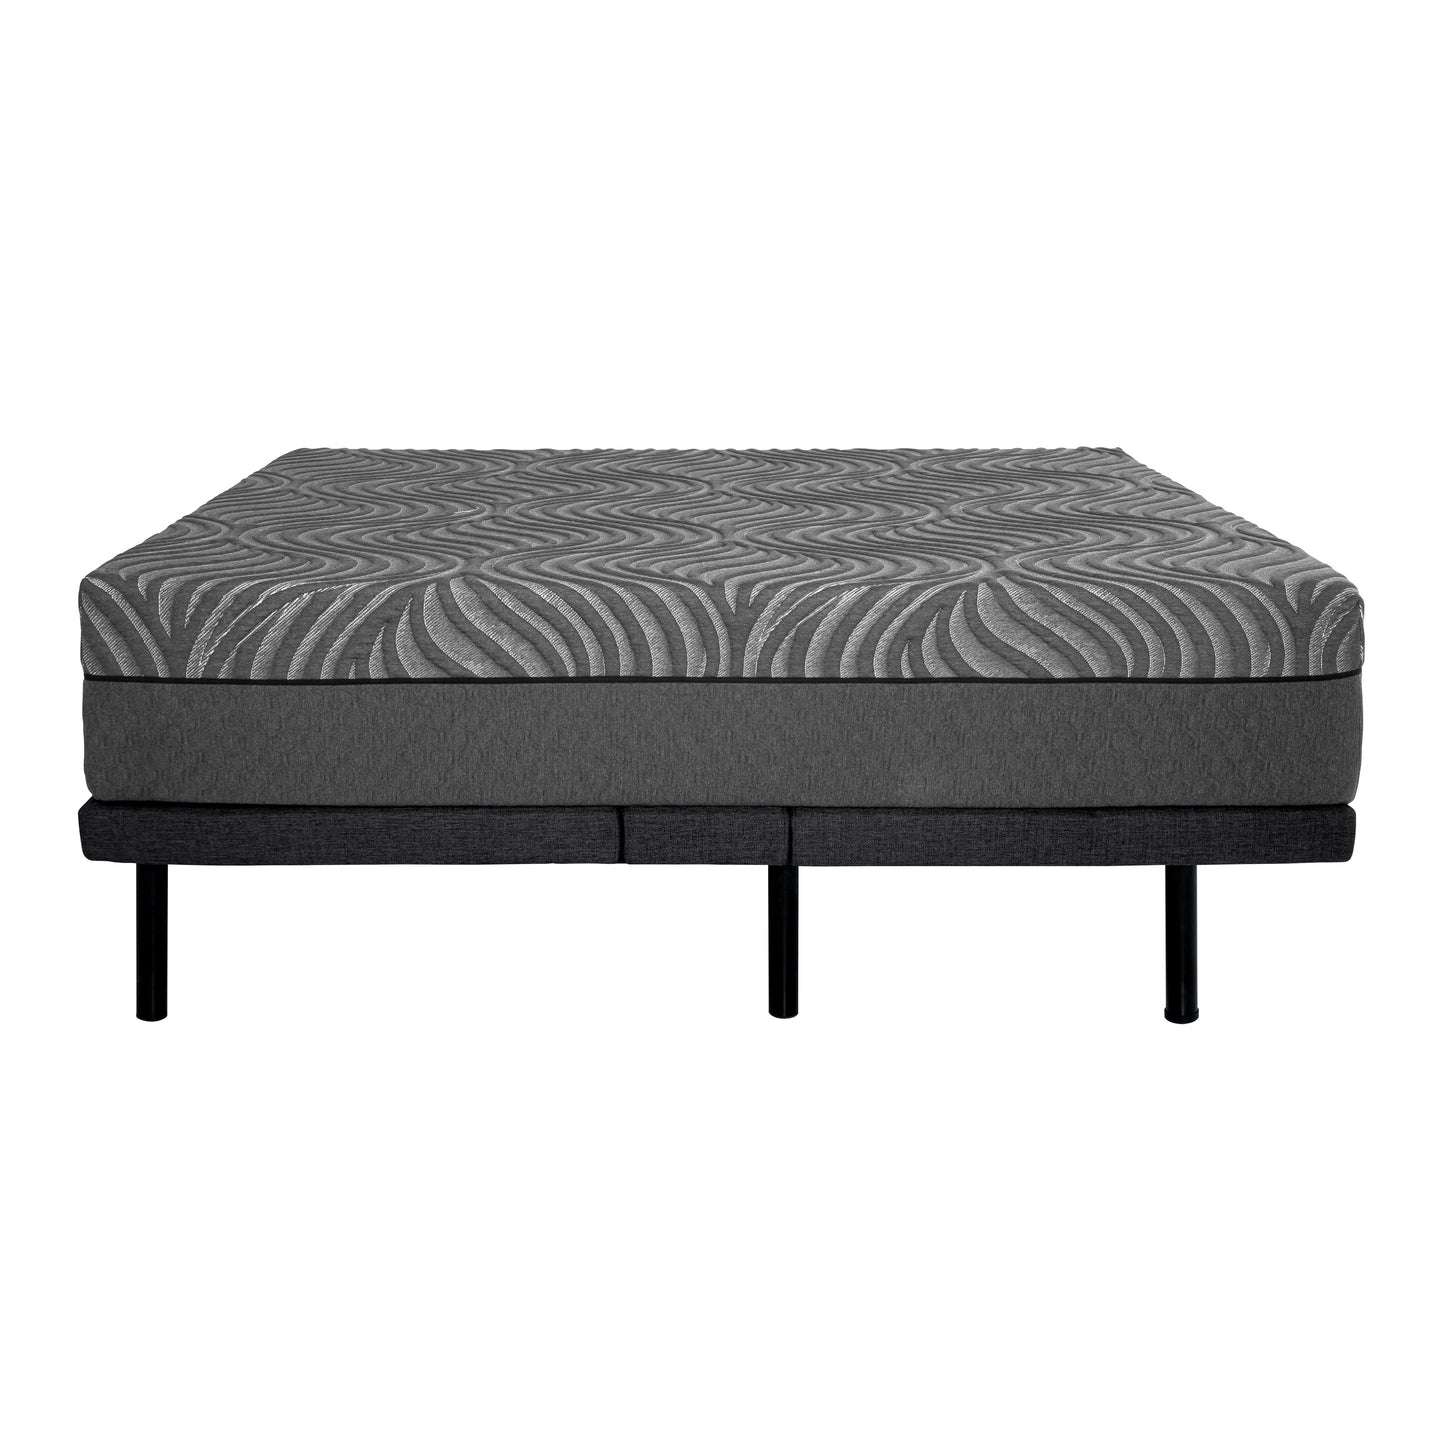 QUEEN 14'' Copper-Infused Memory Foam Hybrid-Taurus Collection